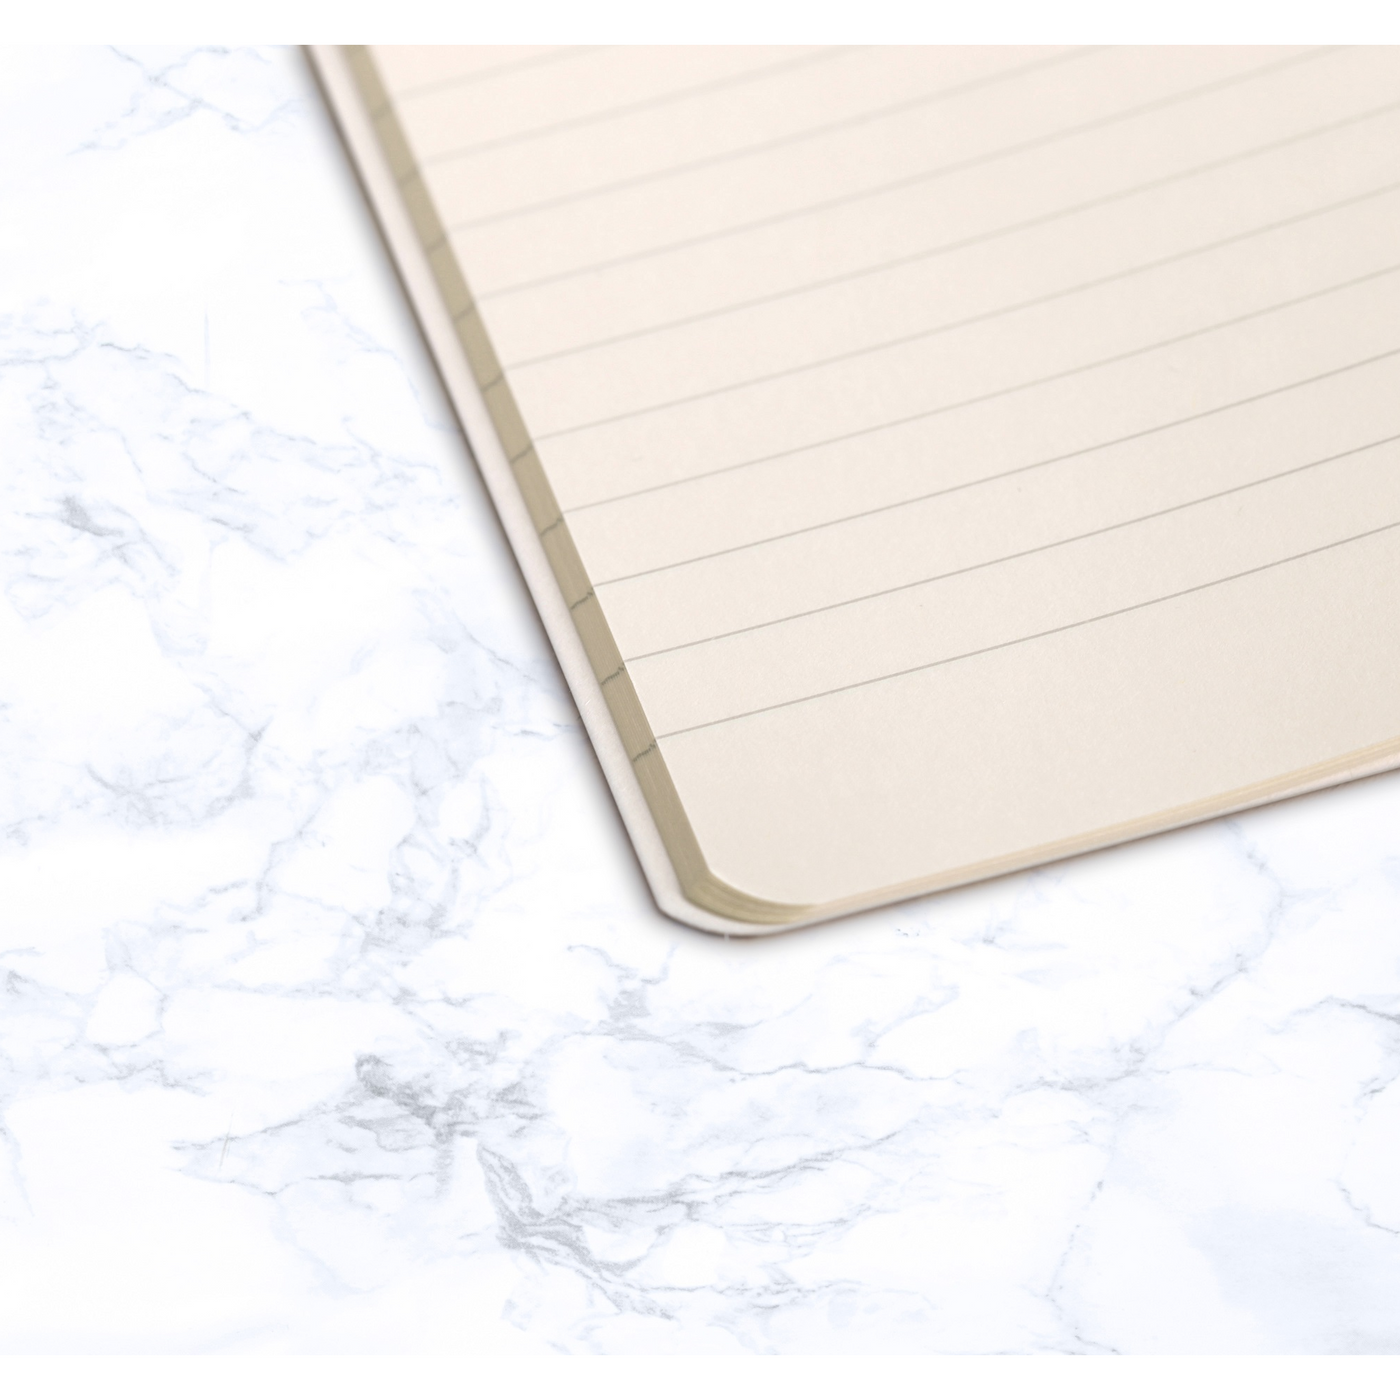 Clairefontaine Neo Deco Sewn Spine Notebook - Ivory Paper - Lined 48 Sheets - 6 x 8 1/4 - Diamond | Atlas Stationers.